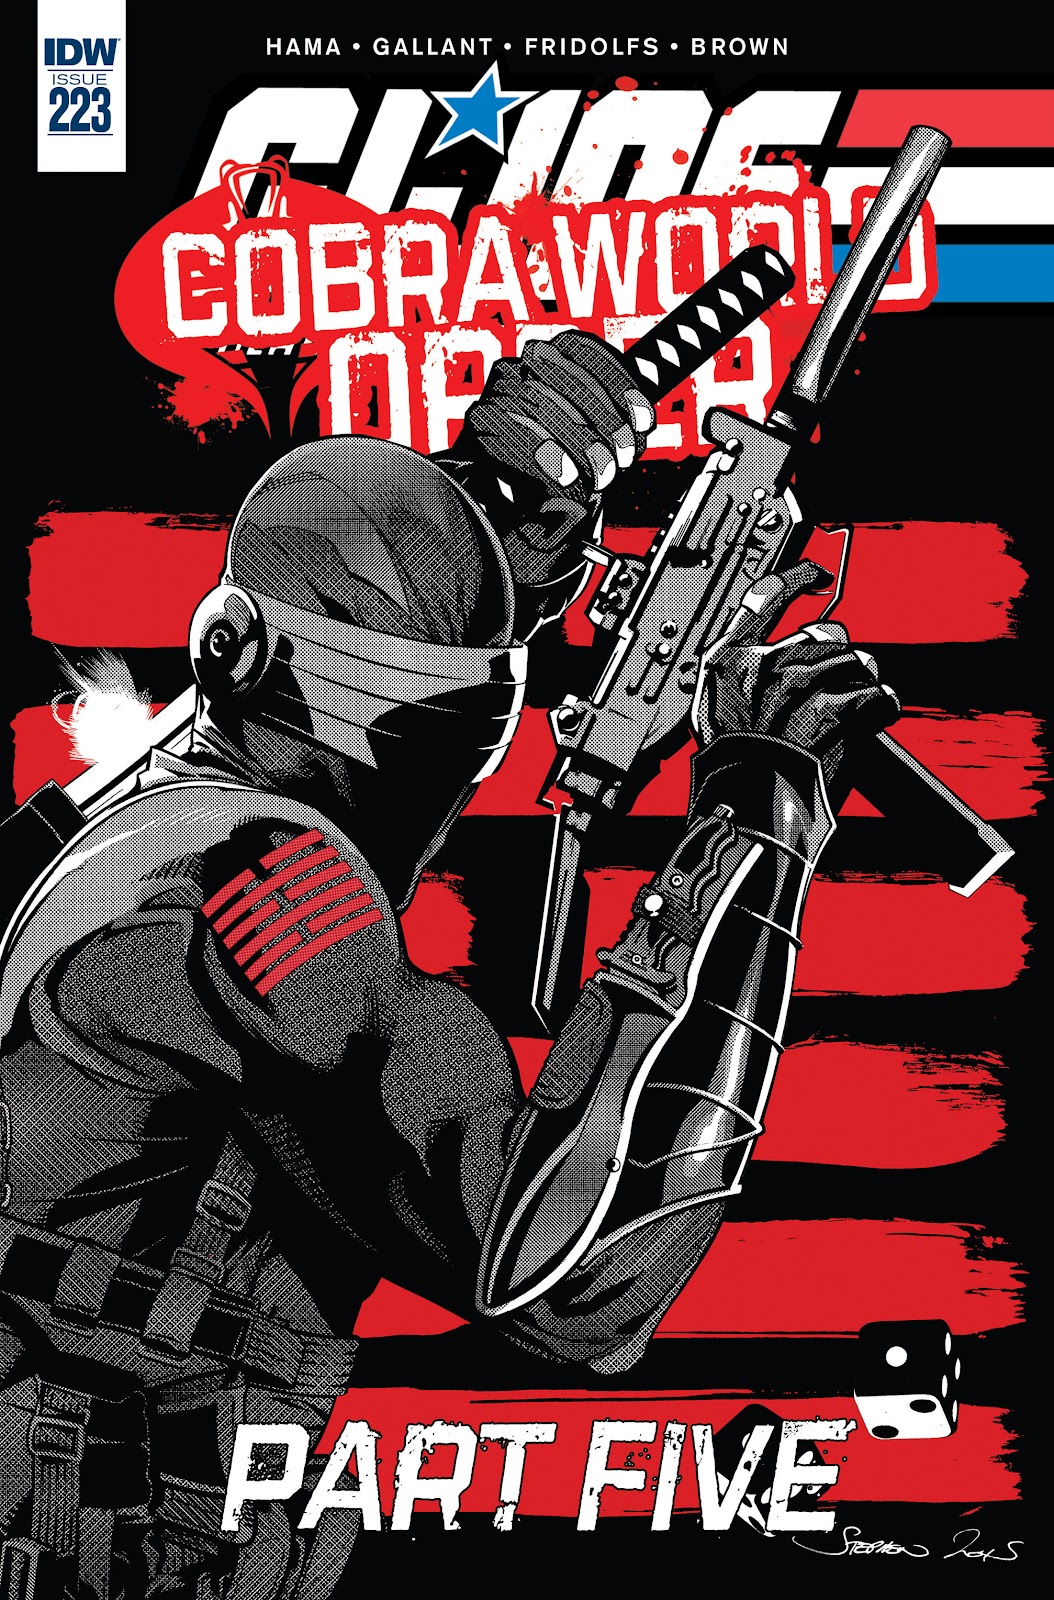 G.I. Joe: A Real American Hero issue 223 - Page 1